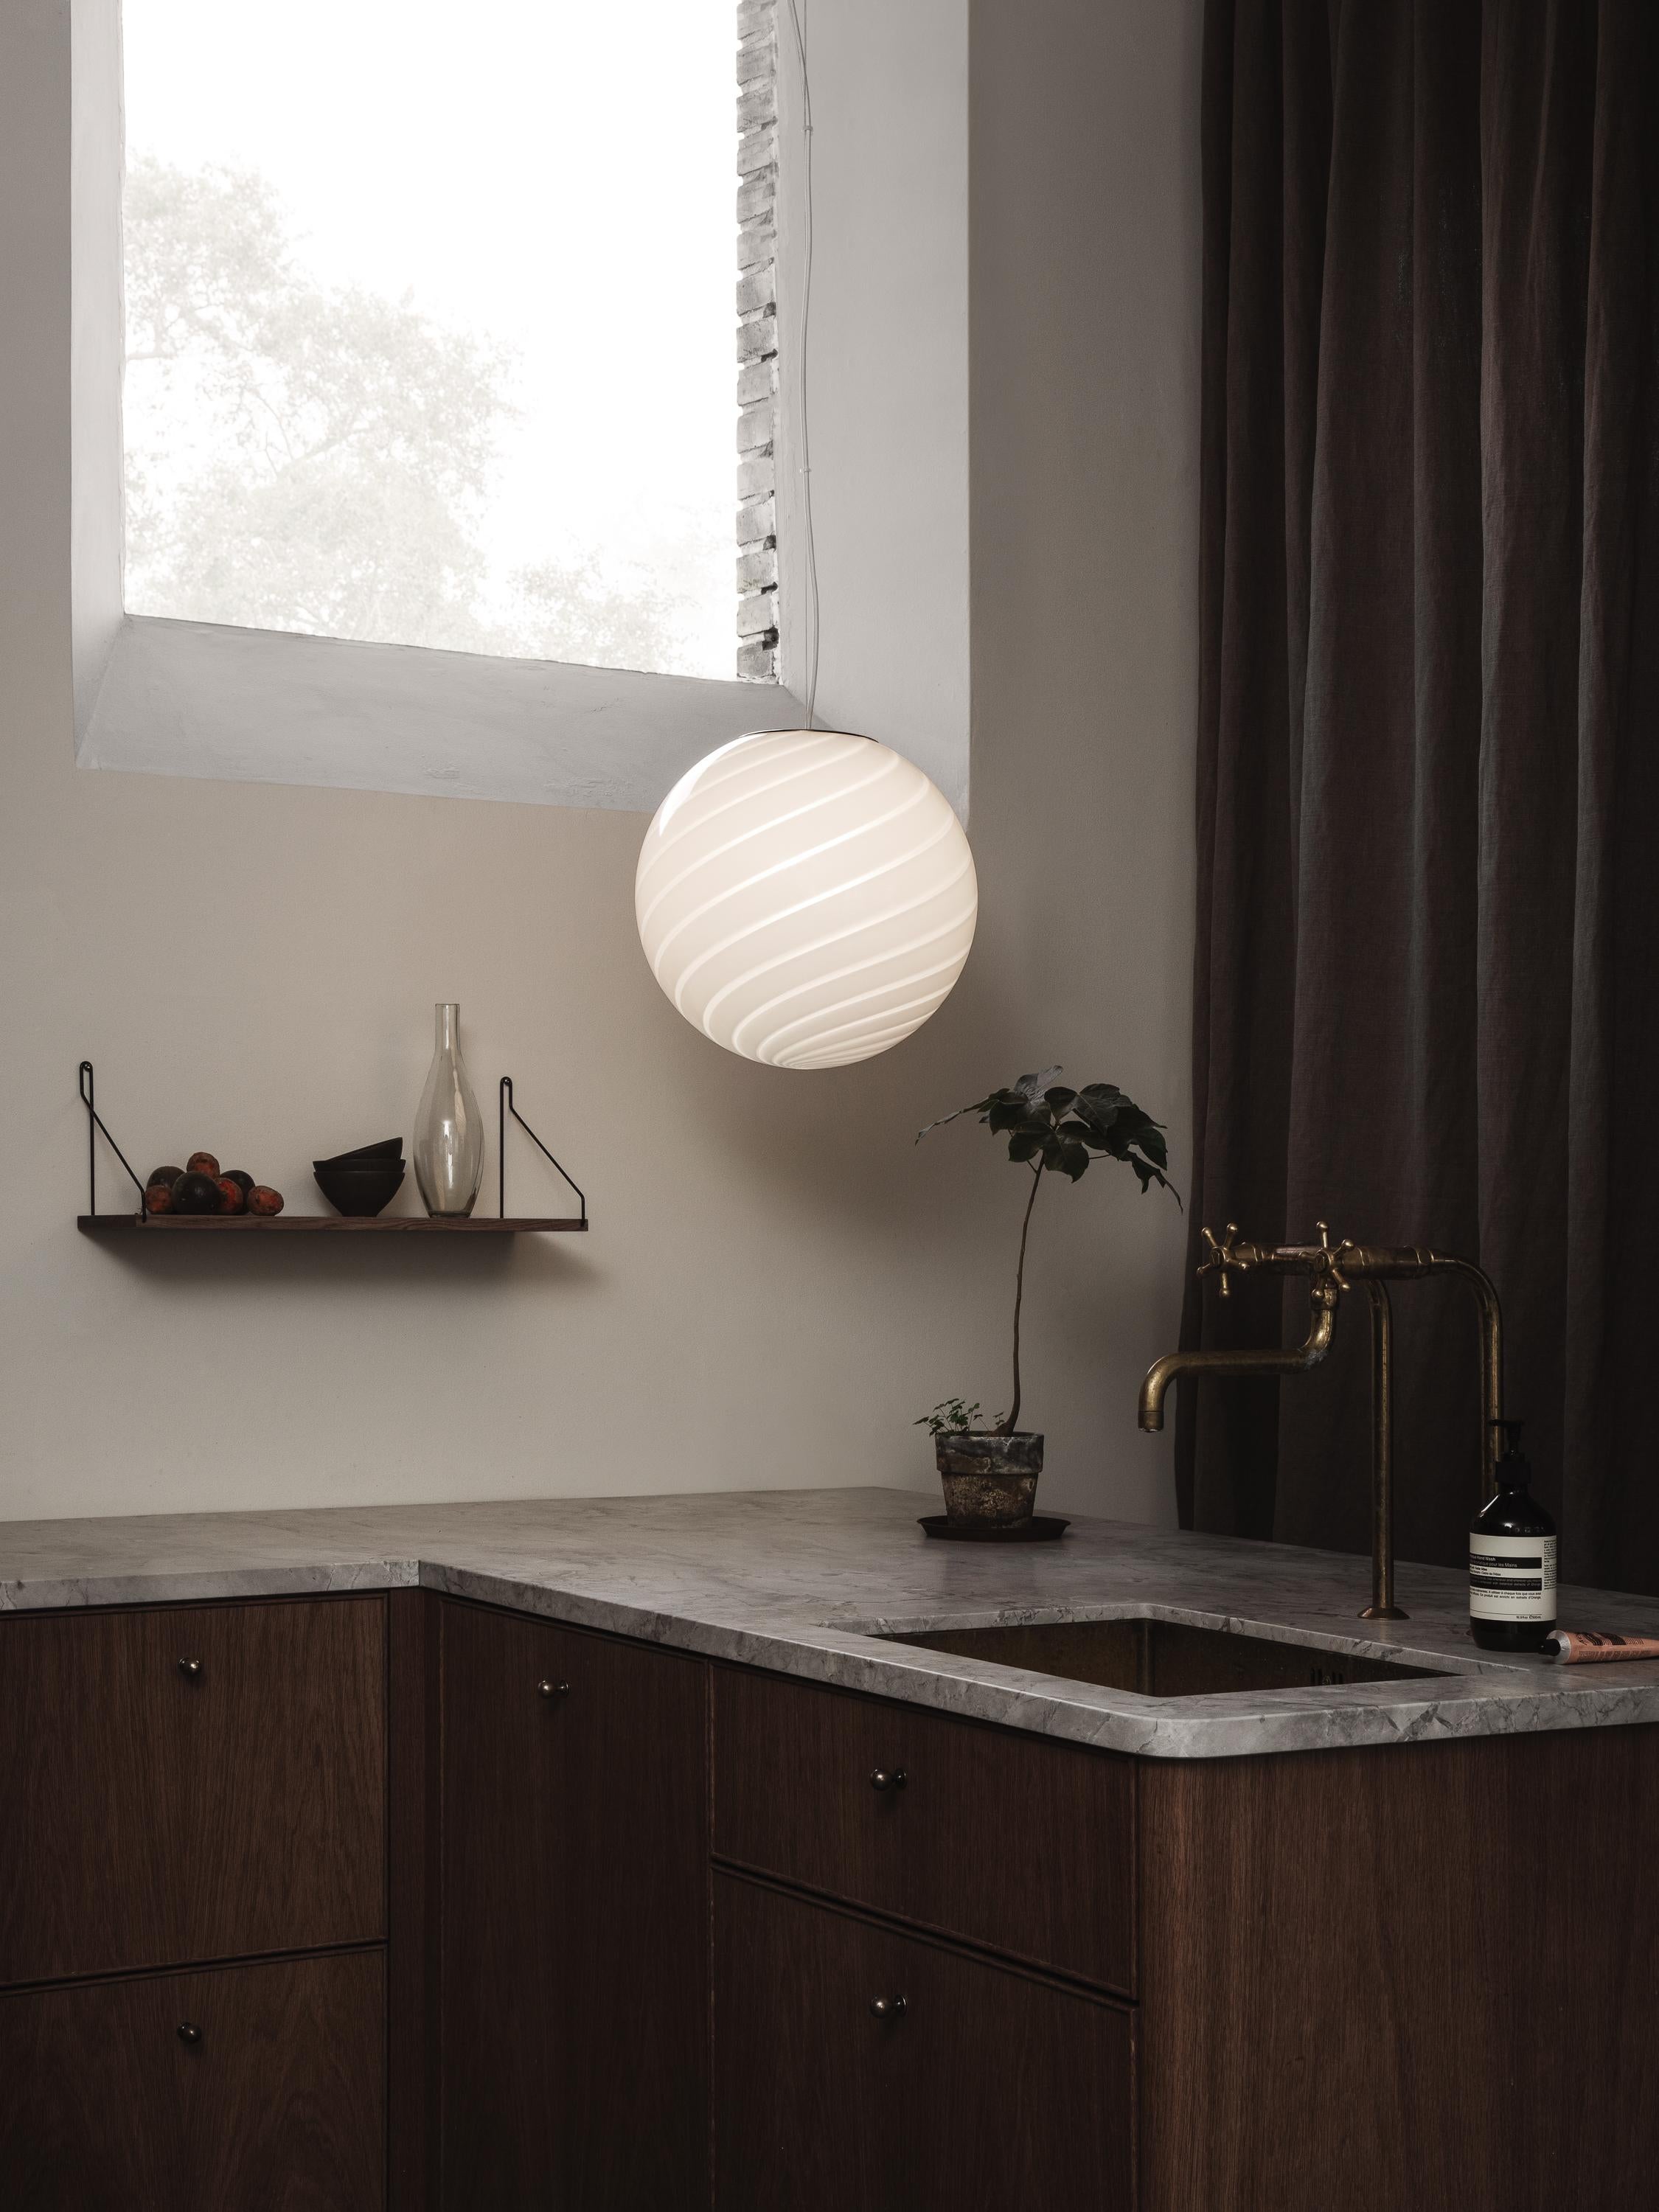 Sphere-shaped pendant ceiling lamp crafted from mouth-blown opaline glass. The design features a swirl pattern obtained using an original 1970s mould, specifically picked to give the lamp a clean expression. The piece includes a hand-casted fitting